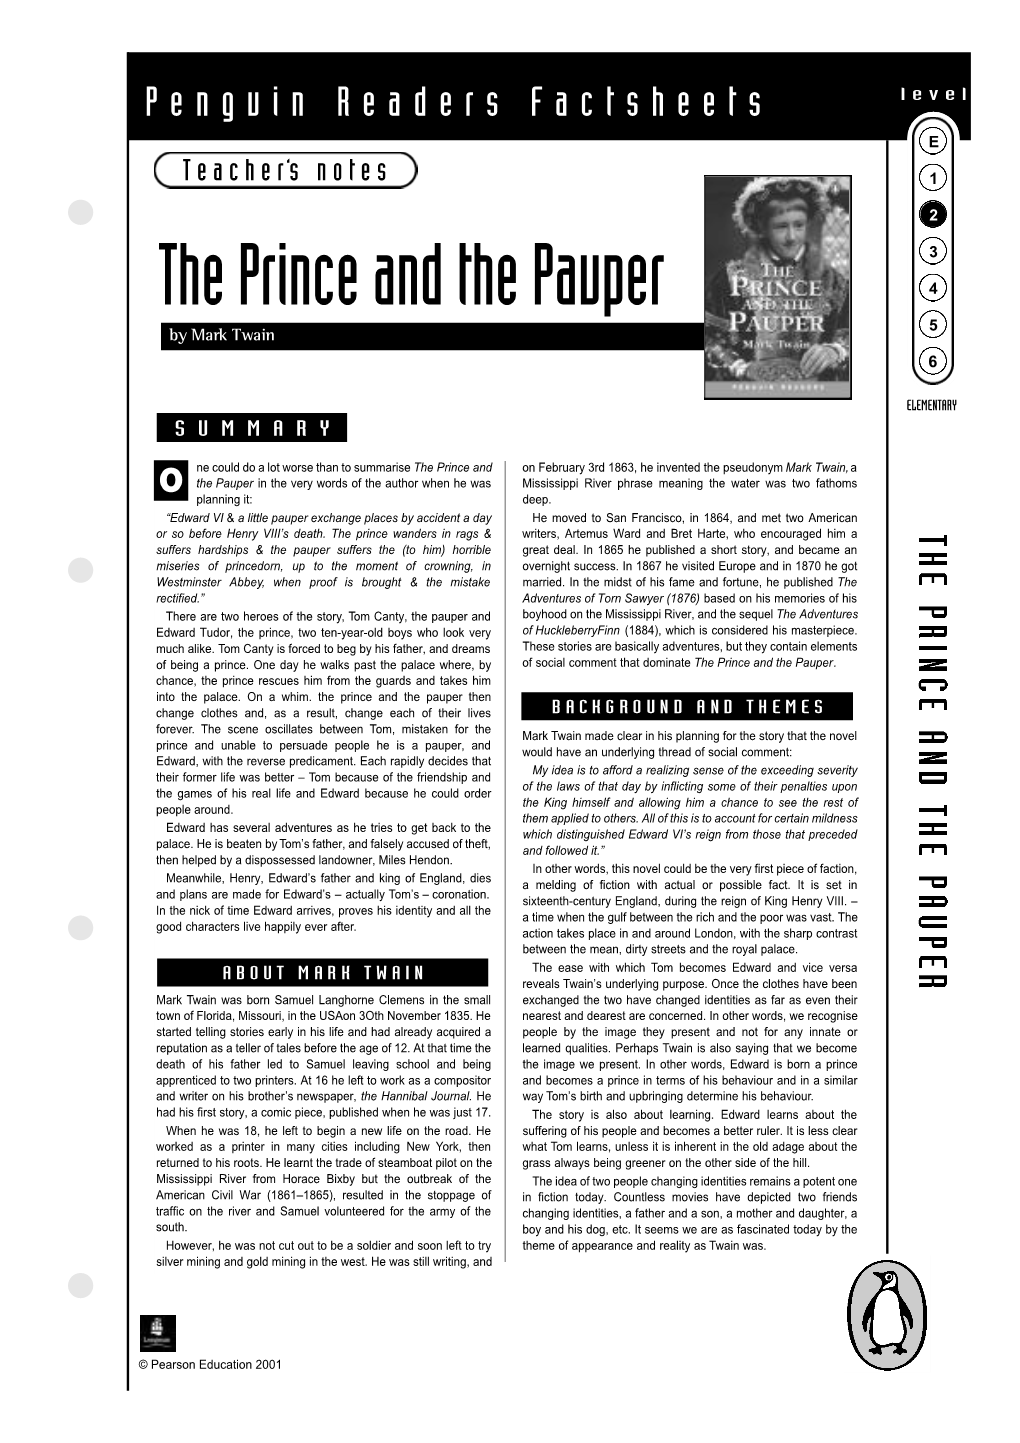 The Prince and the Pauper 4 5 by Mark Twain 6